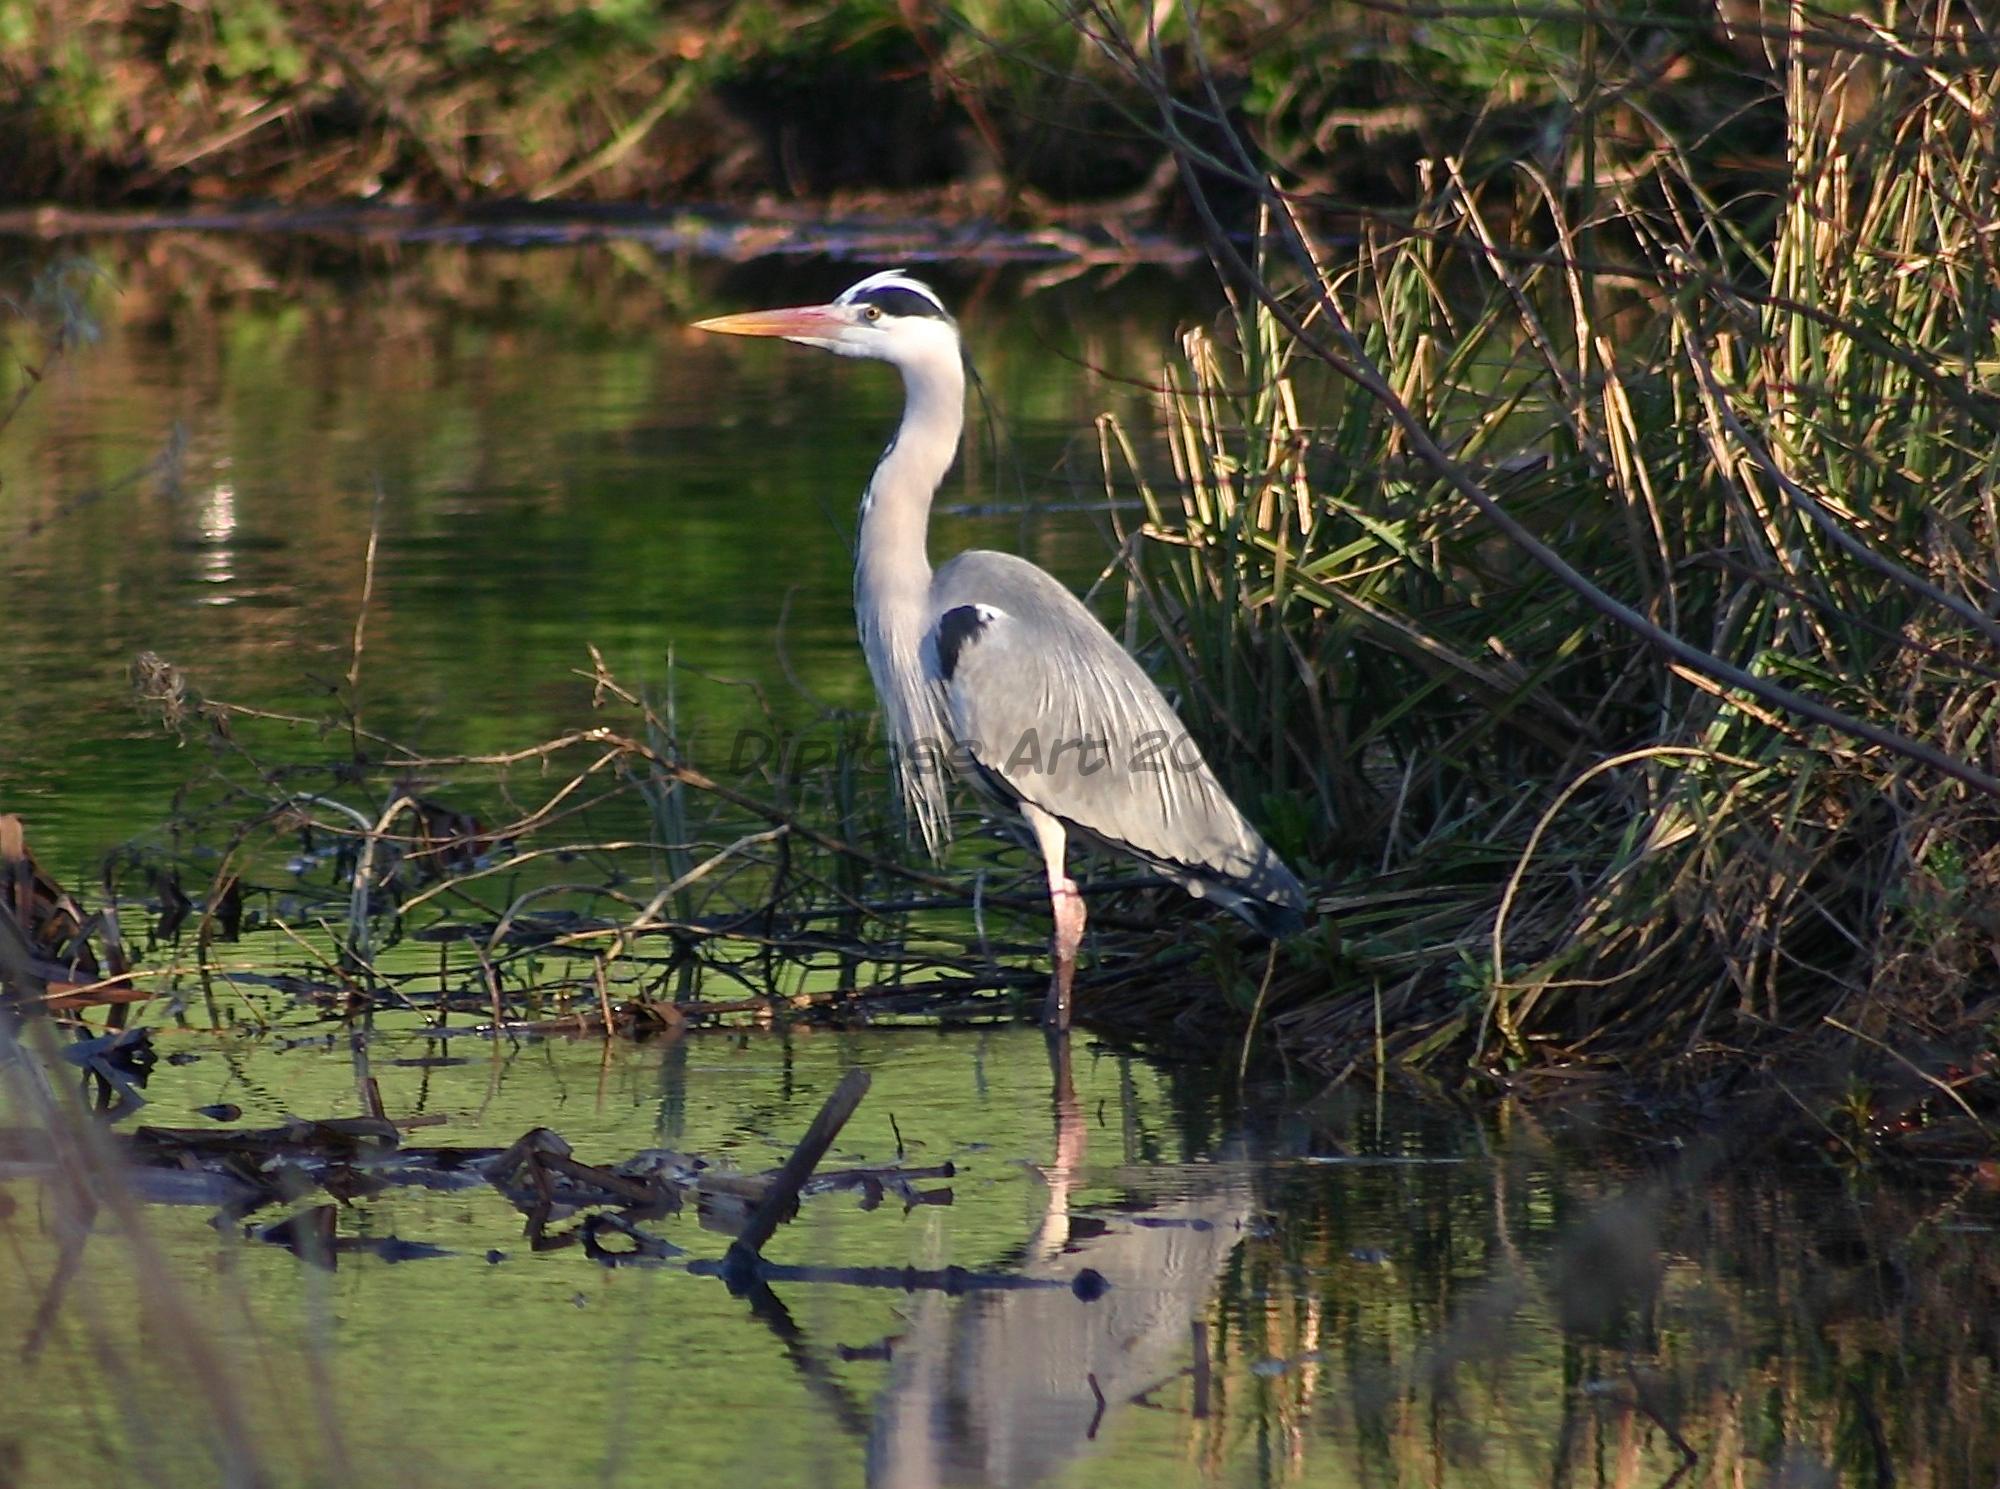 Another Heron - this time wading - I think they are elegant